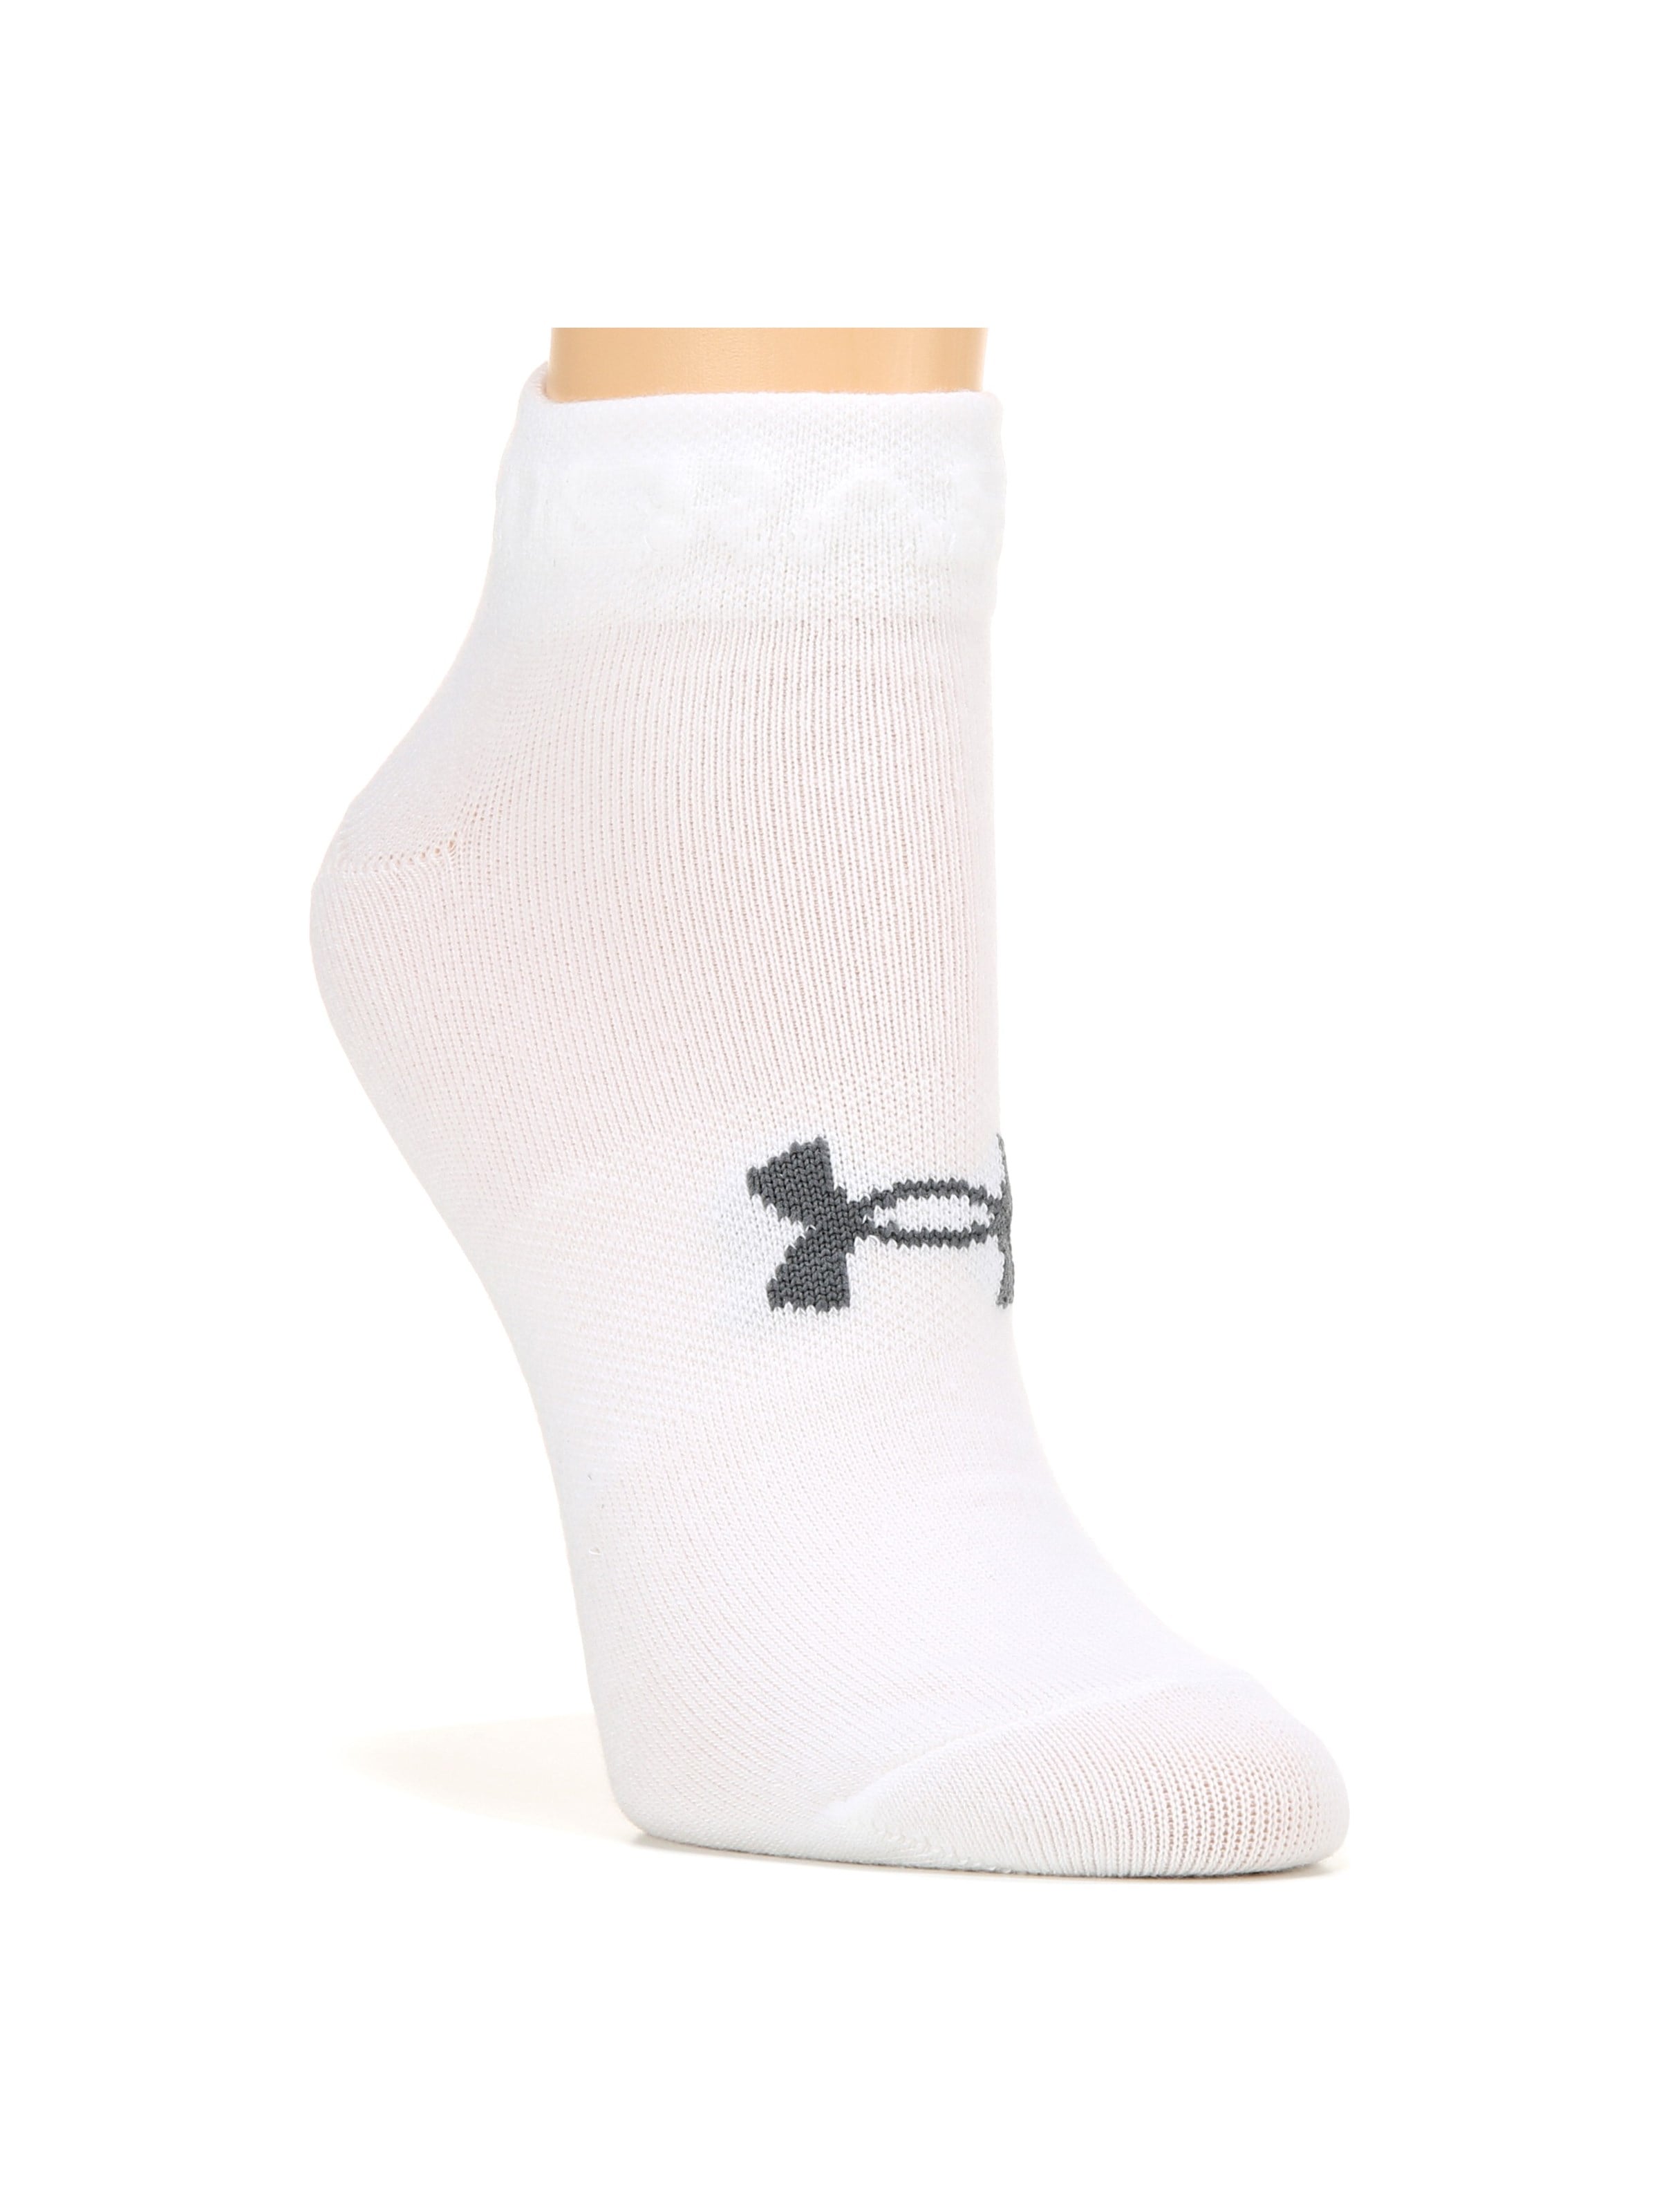 Value Pack of 12 Women's All White Thin and Lightweight Low Cut Ankle Socks 